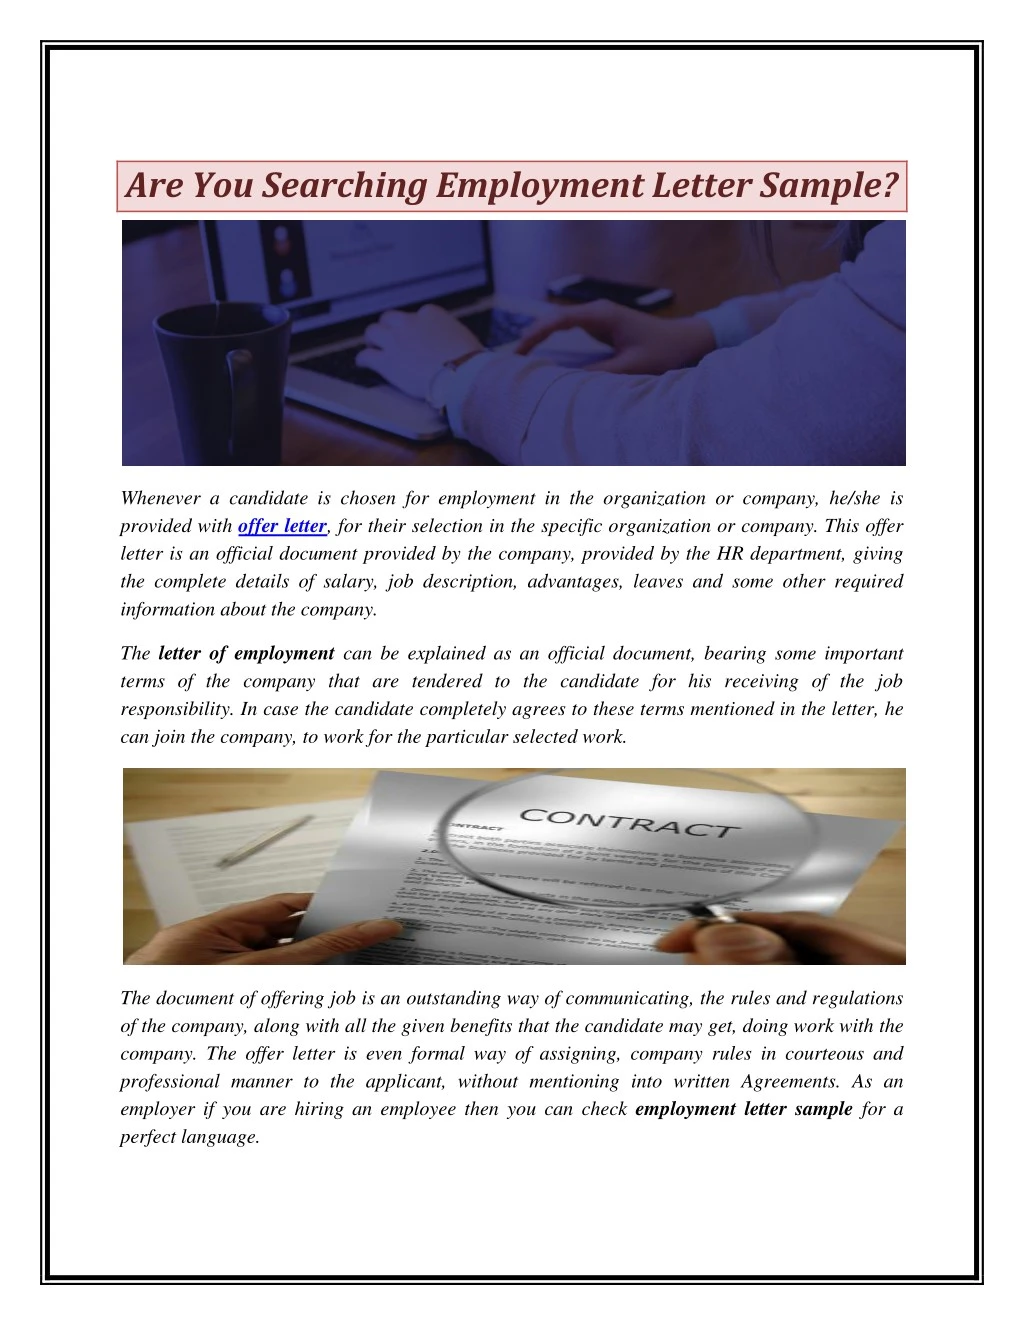 are you searching employment letter sample